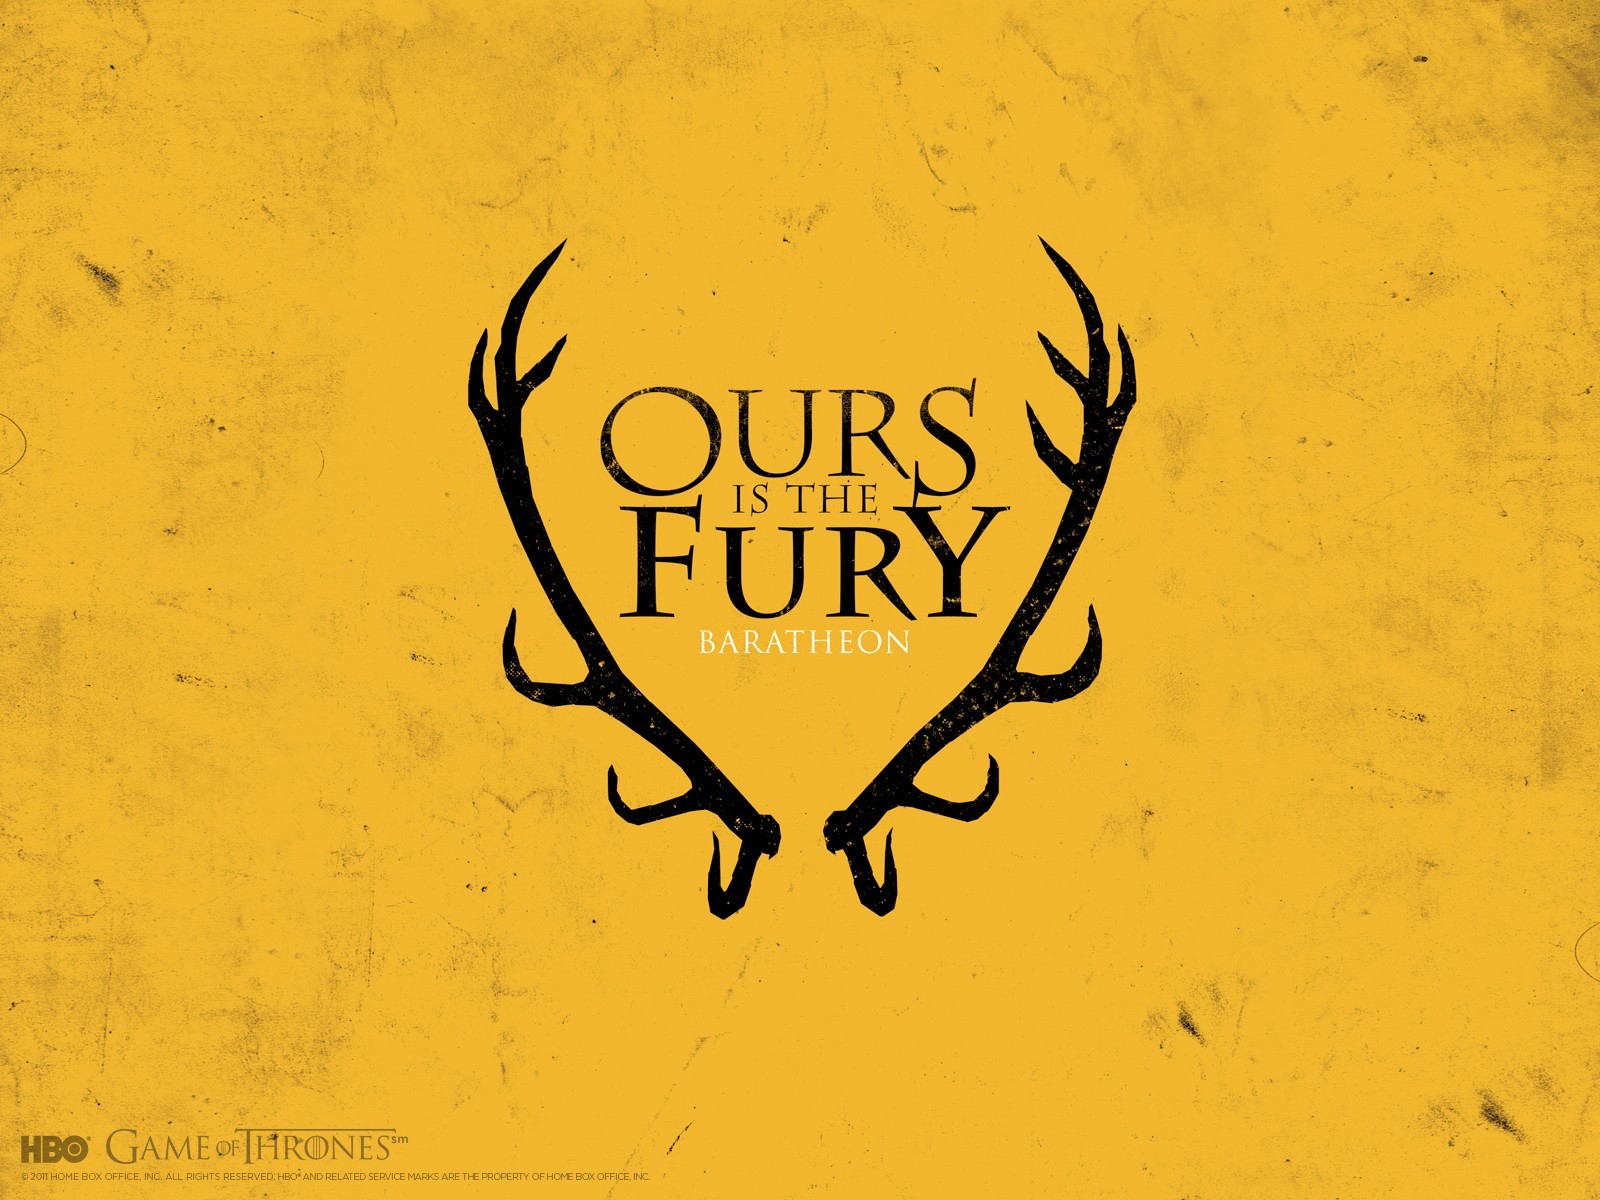 General 1600x1200 Game of Thrones A Song of Ice and Fire House Baratheon sigils simple background TV series